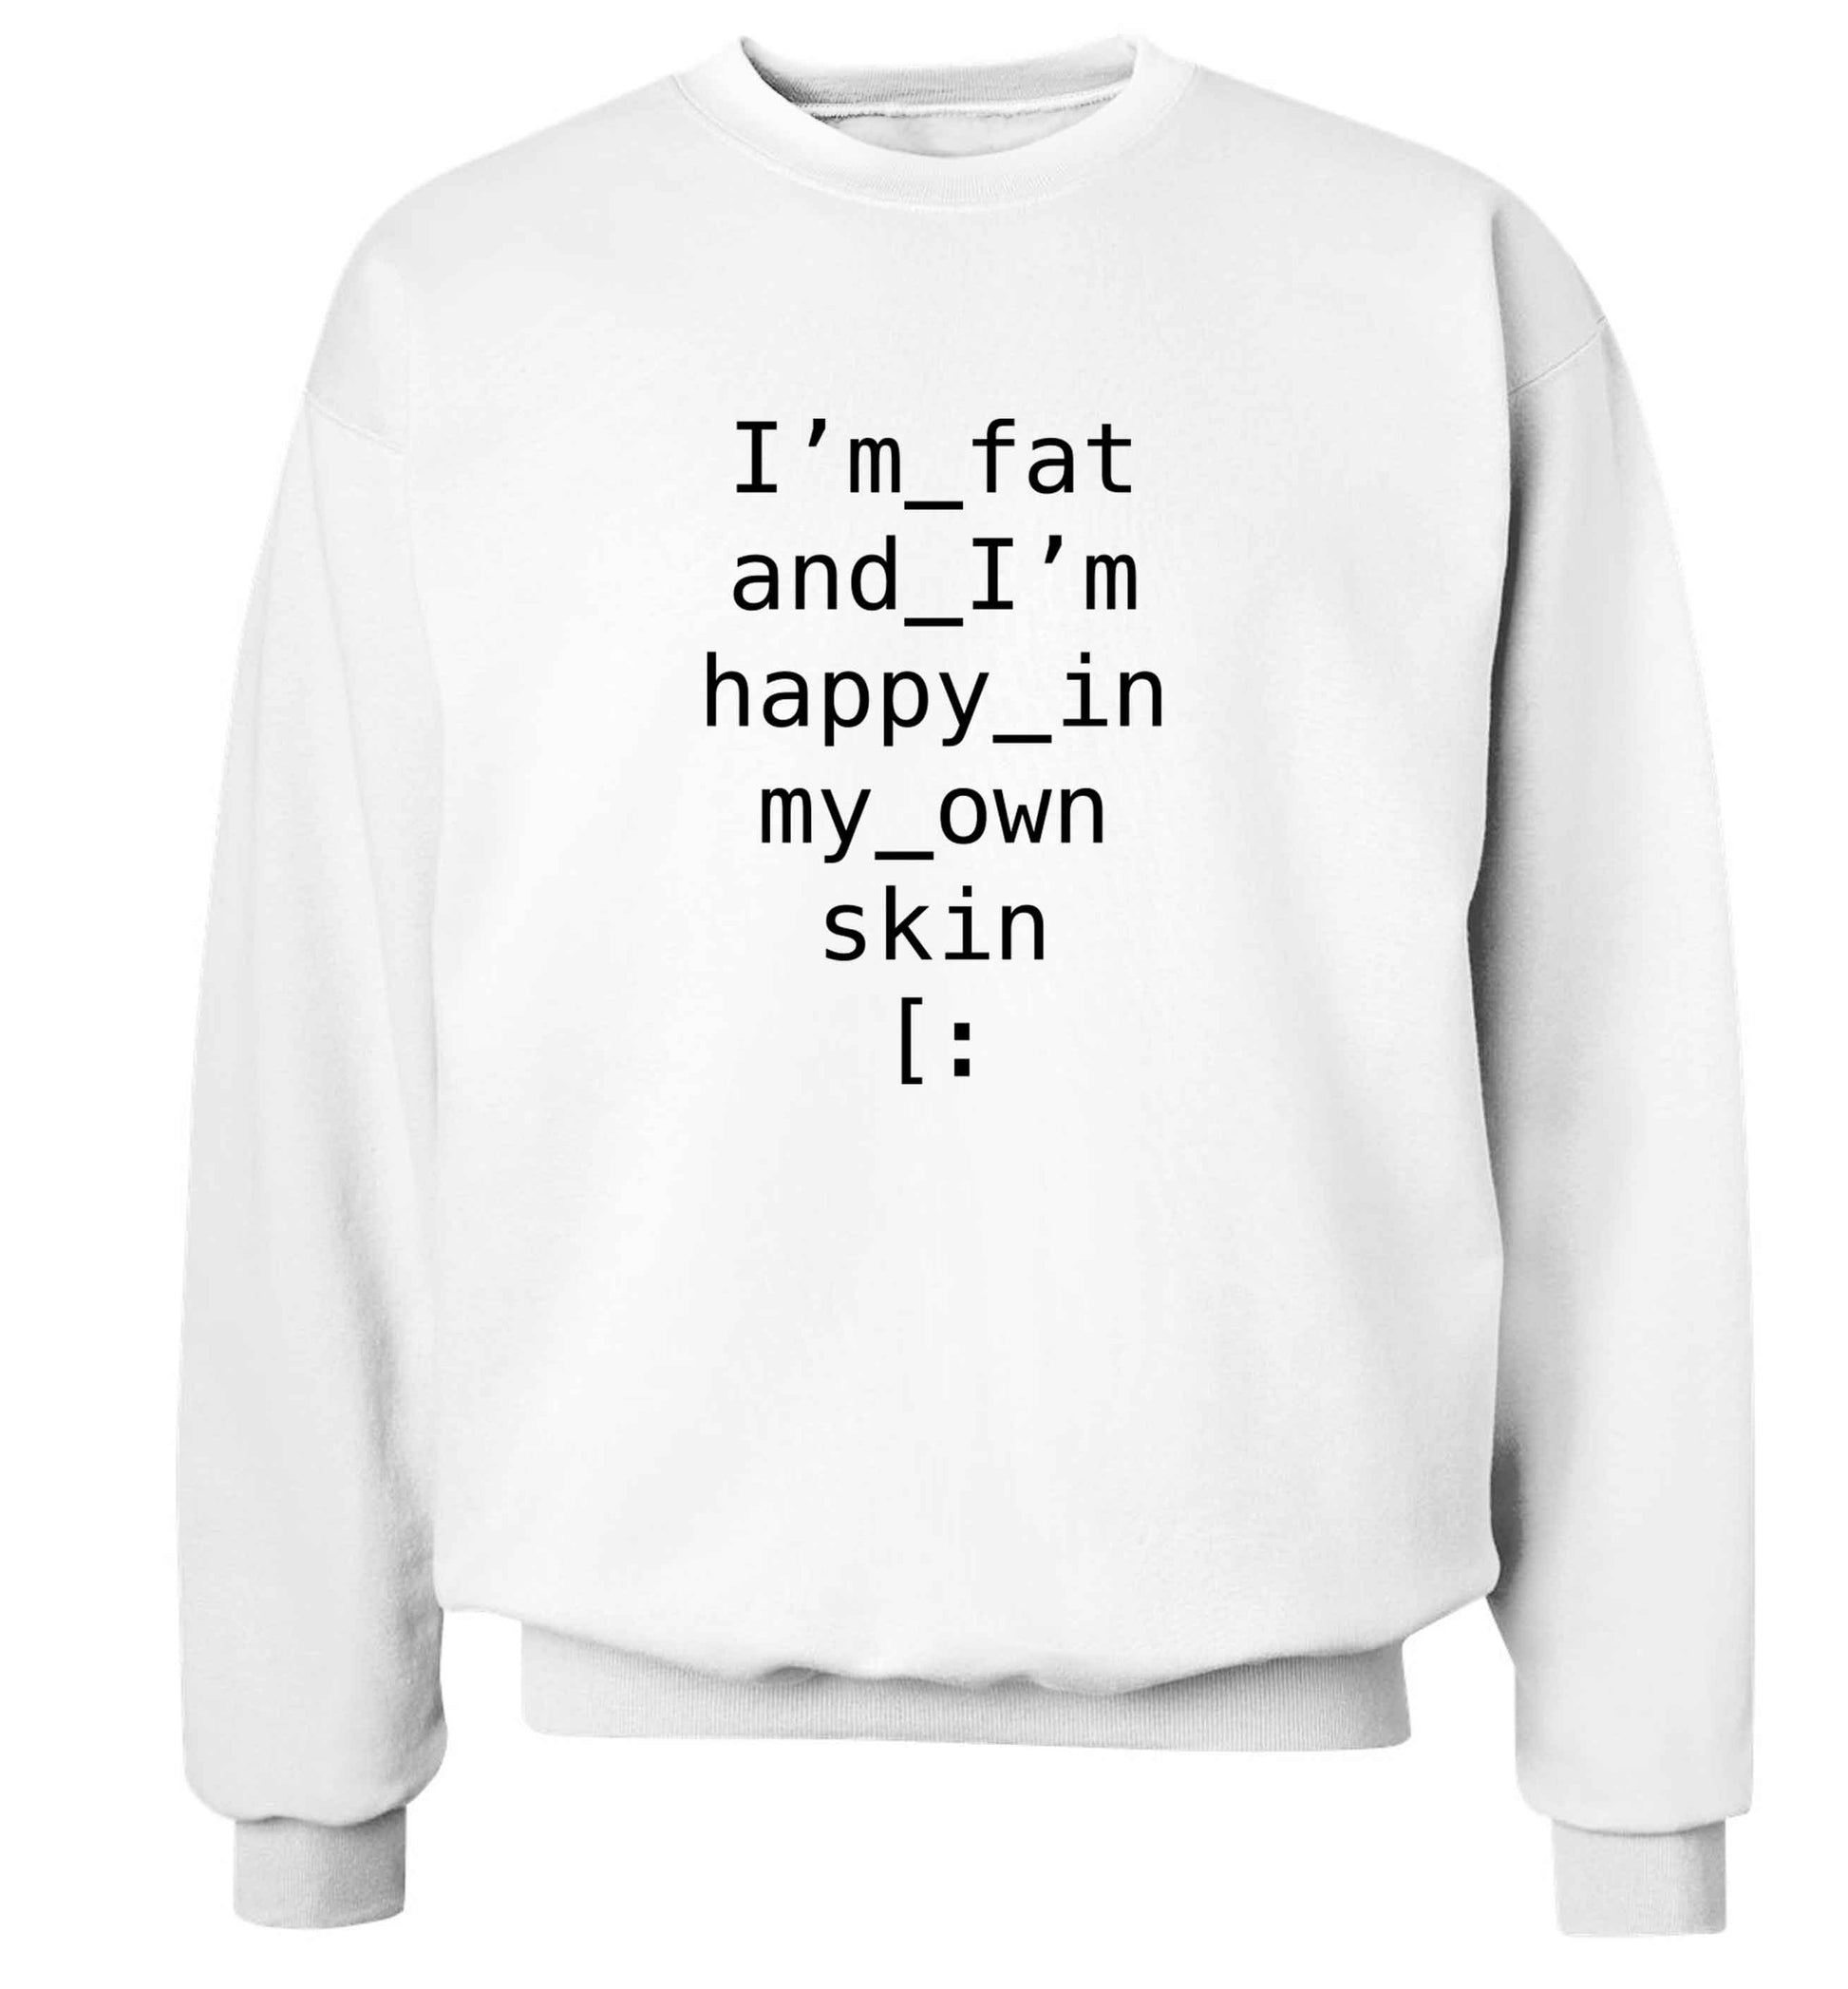 I'm fat and happy in my own skin adult's unisex white sweater 2XL